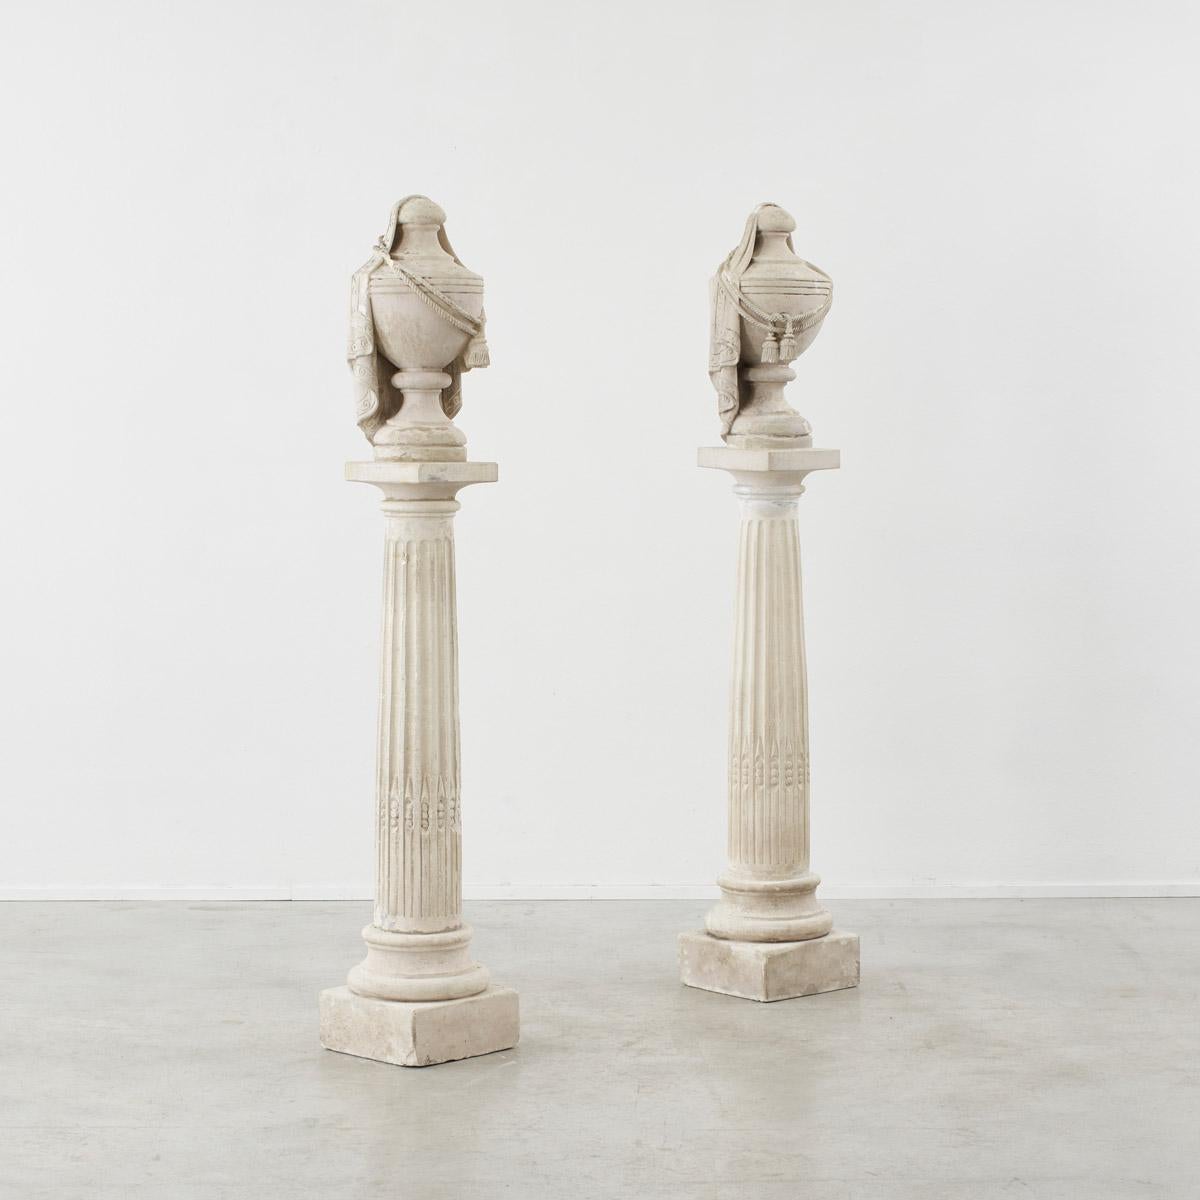 A decorative pair of classical antique French columns, with vessels fixed atop each plinth.